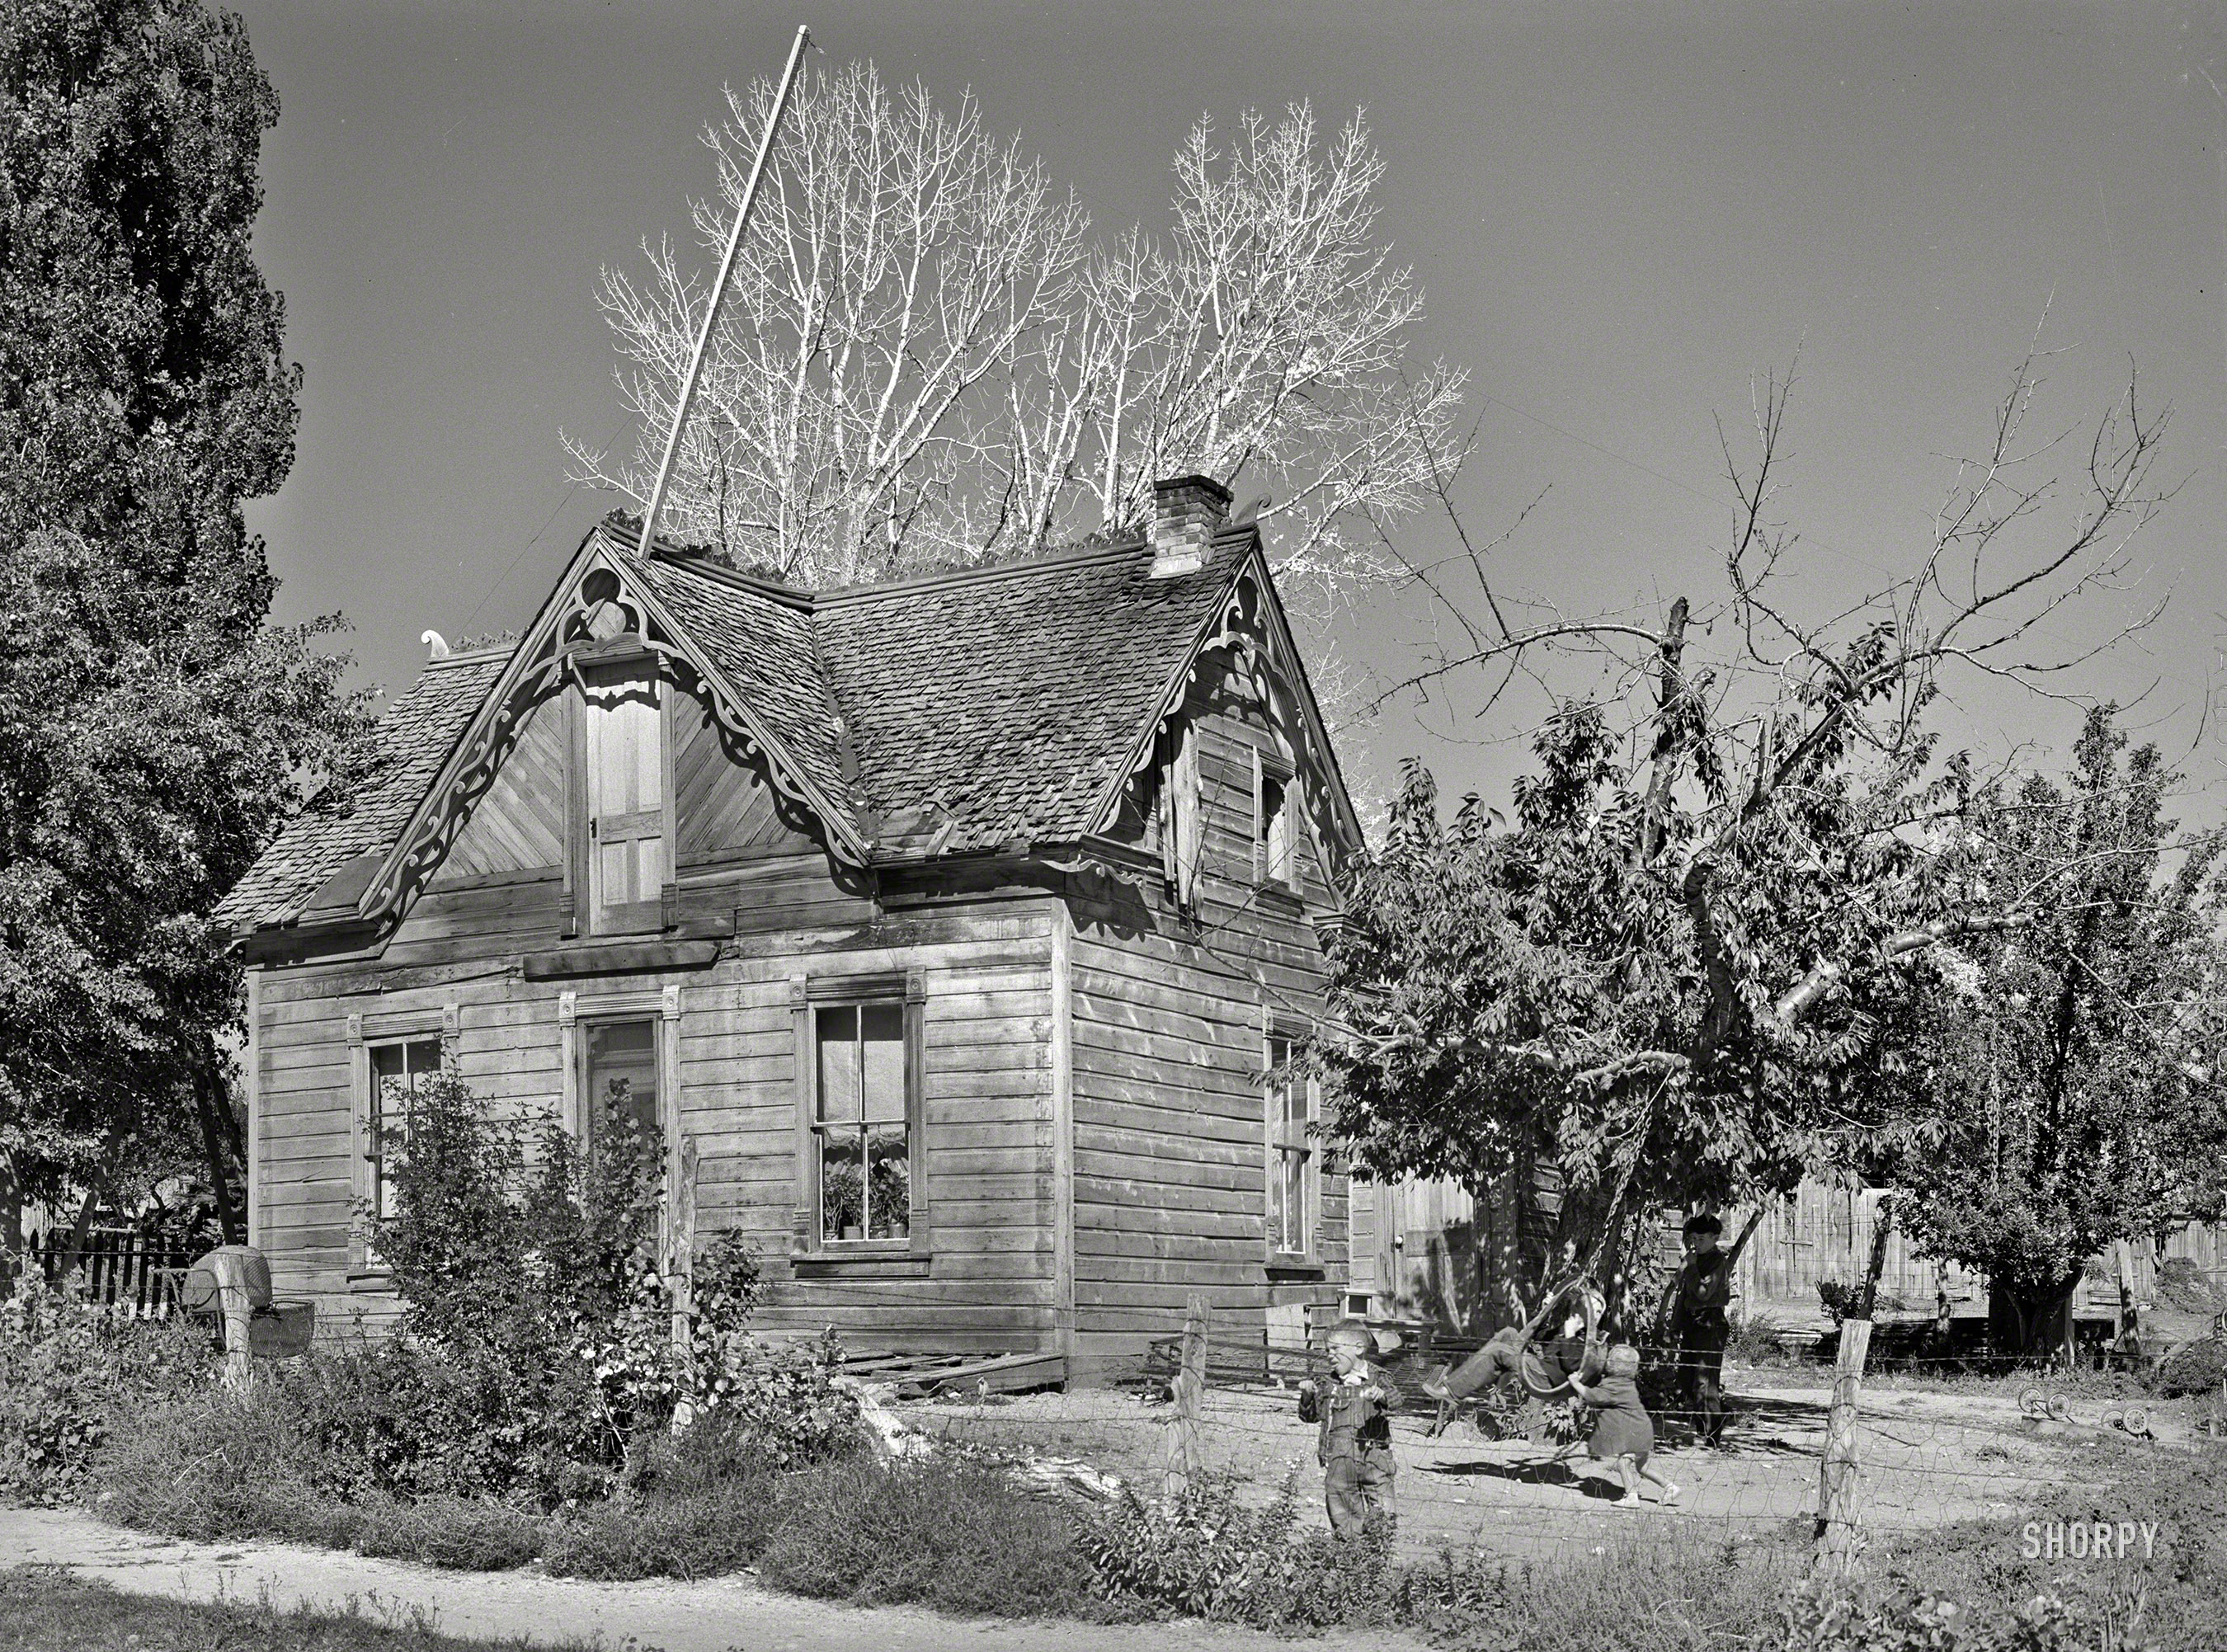 November 1940. "Children in yard of old Mormon house at Tropic, Utah." Photo by Russell Lee for the Farm Security Administration. View full size.